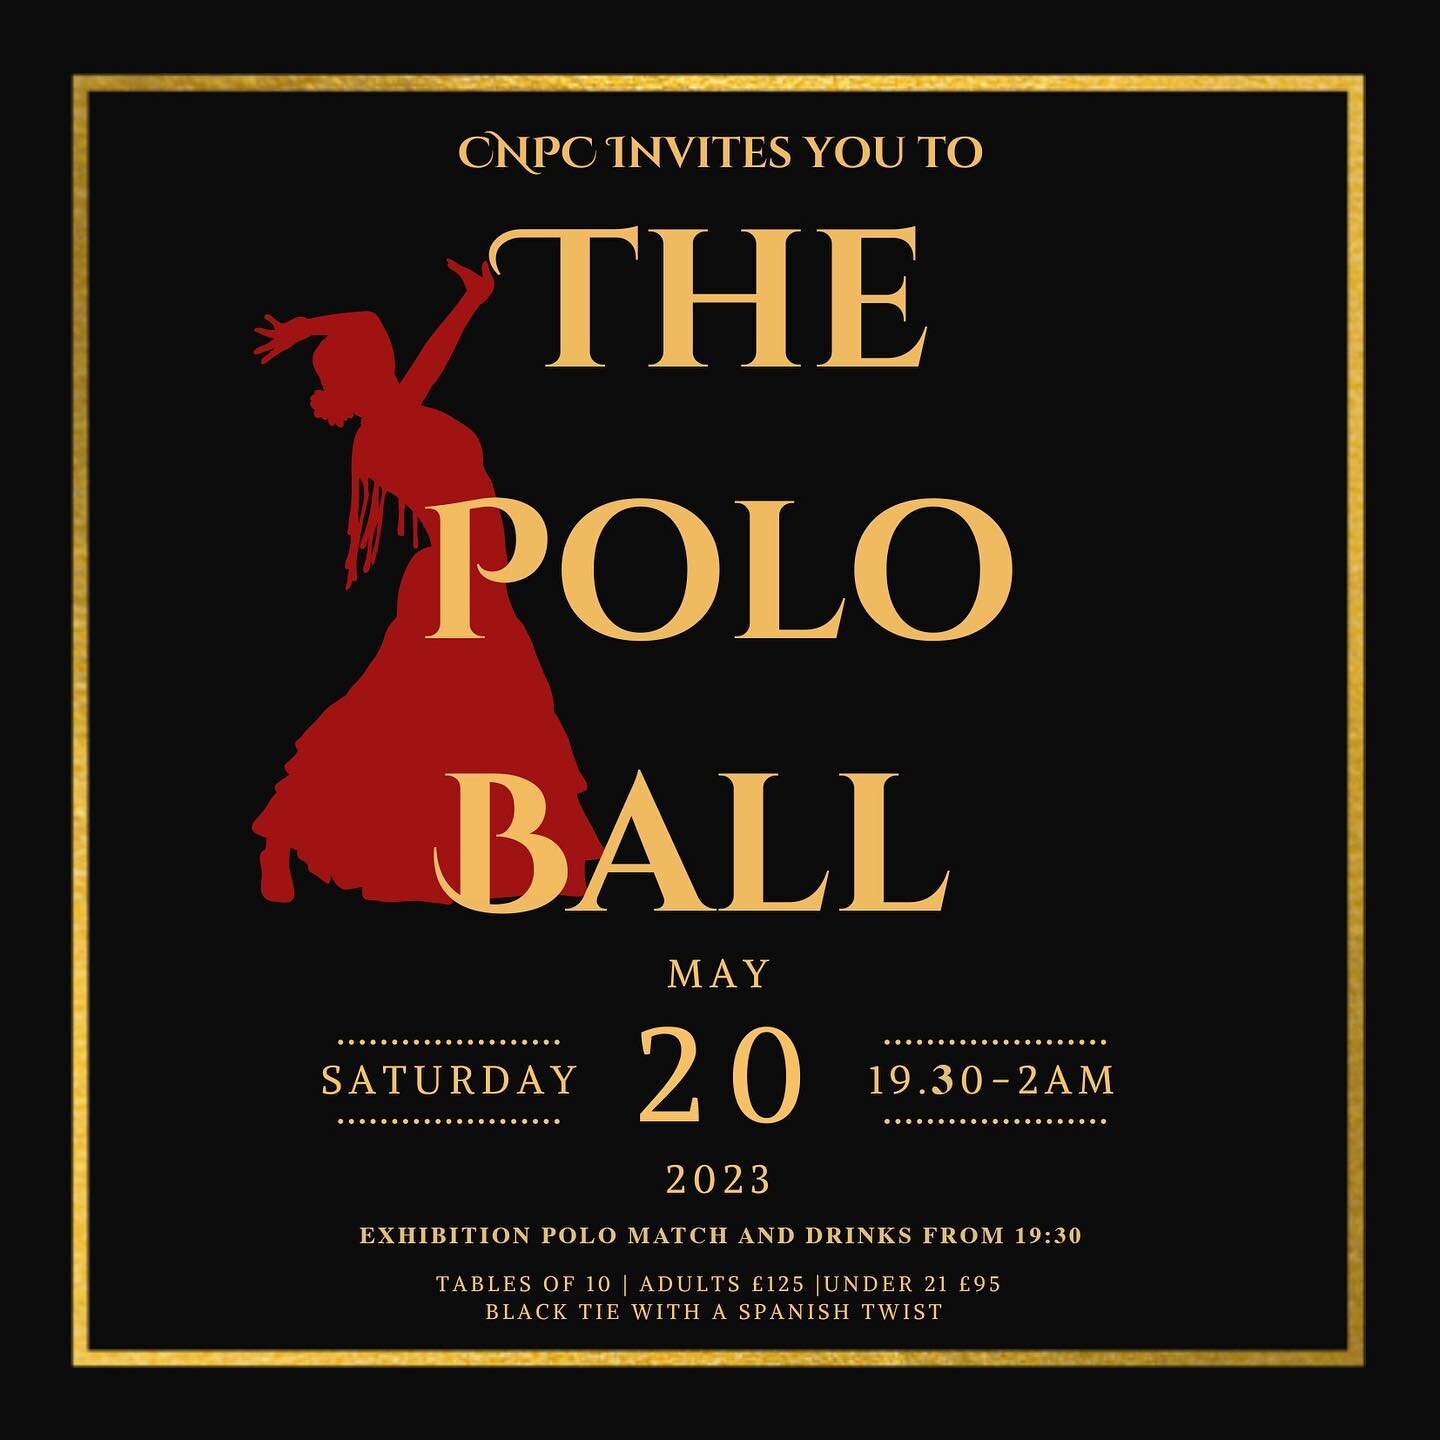 *IMPORTANT INFORMATION*
We look forward to seeing you at The Polo Ball tomorrow evening. Please note that the start time of the event has changed and the exhibition polo match and drinks will now both commence from 7.30pm.